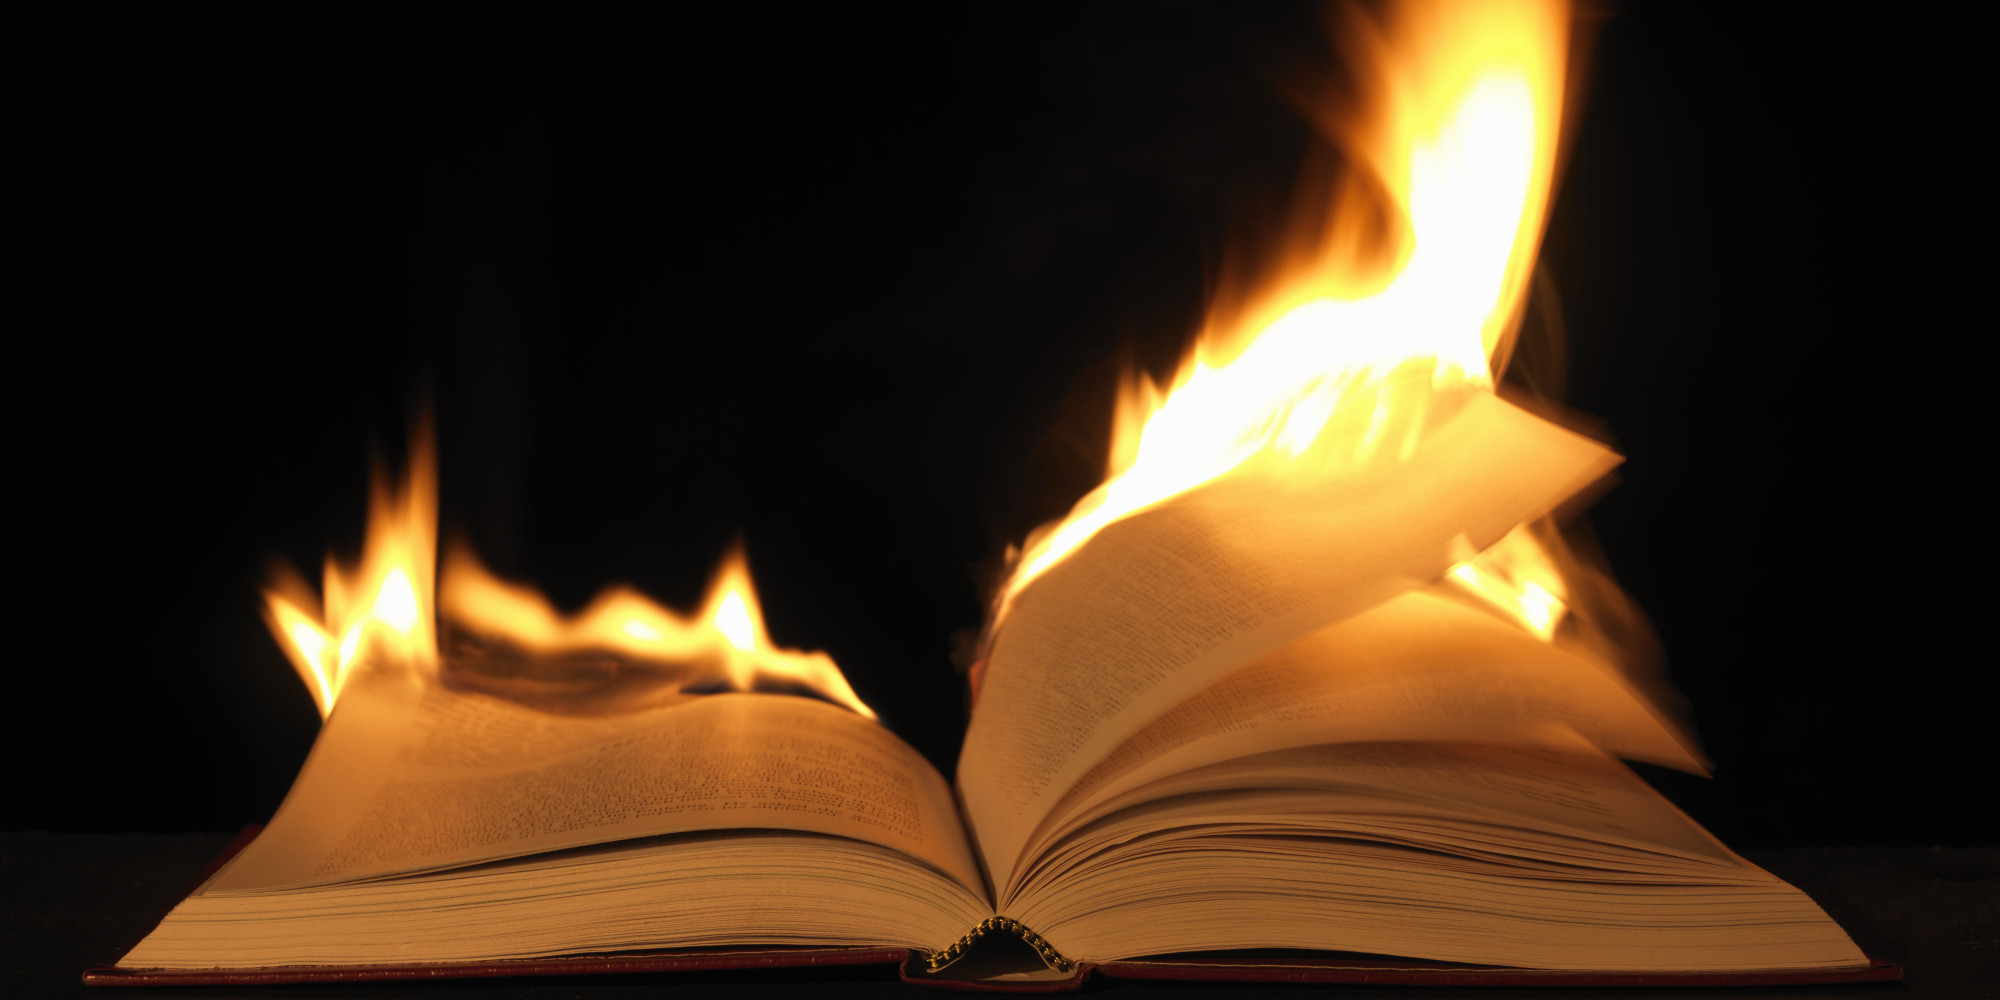 Moscow - Russian Authorities Burn Books Published With Soros Funds ...